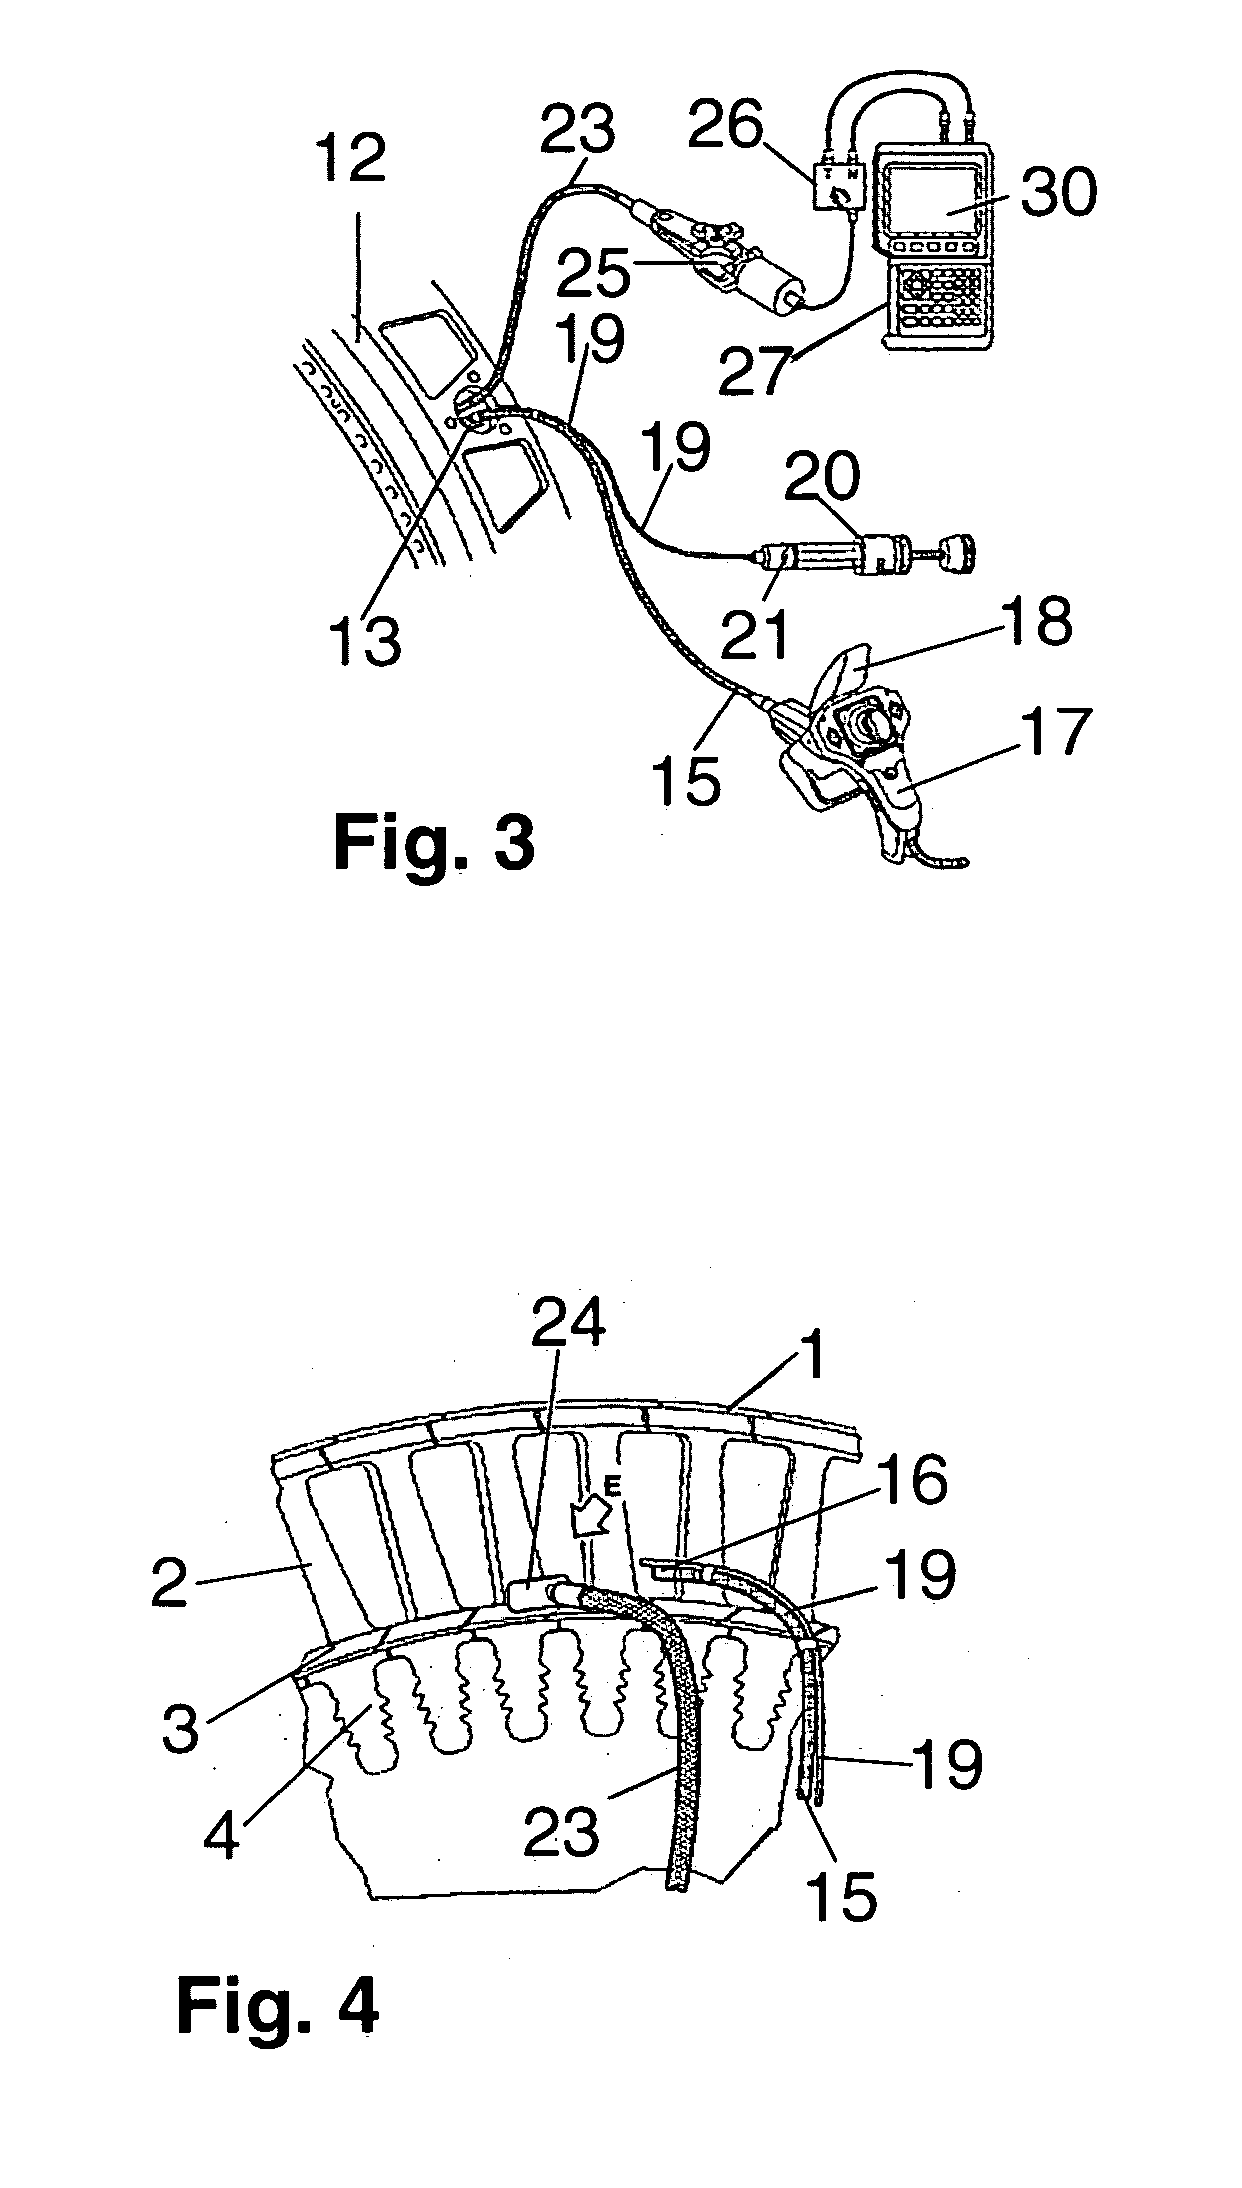 Method and apparatus for non-destructive testing of components of gas turbine engines made of monocrystalline materials